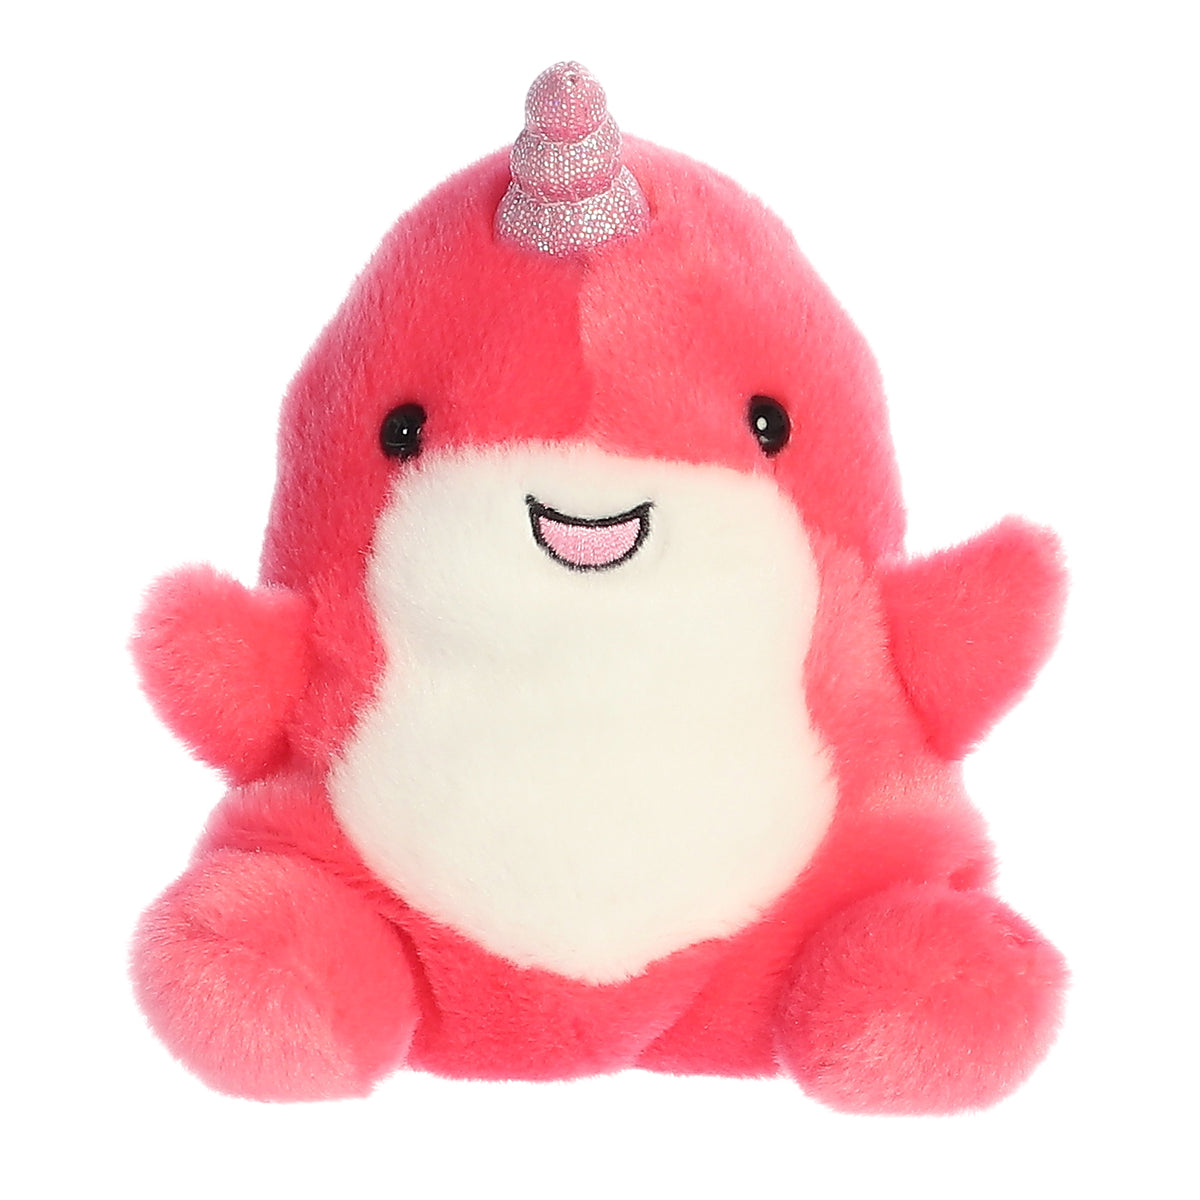 Narwhal plush from Palm Pals in electric pink with a distinctive horn, bringing oceanic magic to the narwhal plush family.
